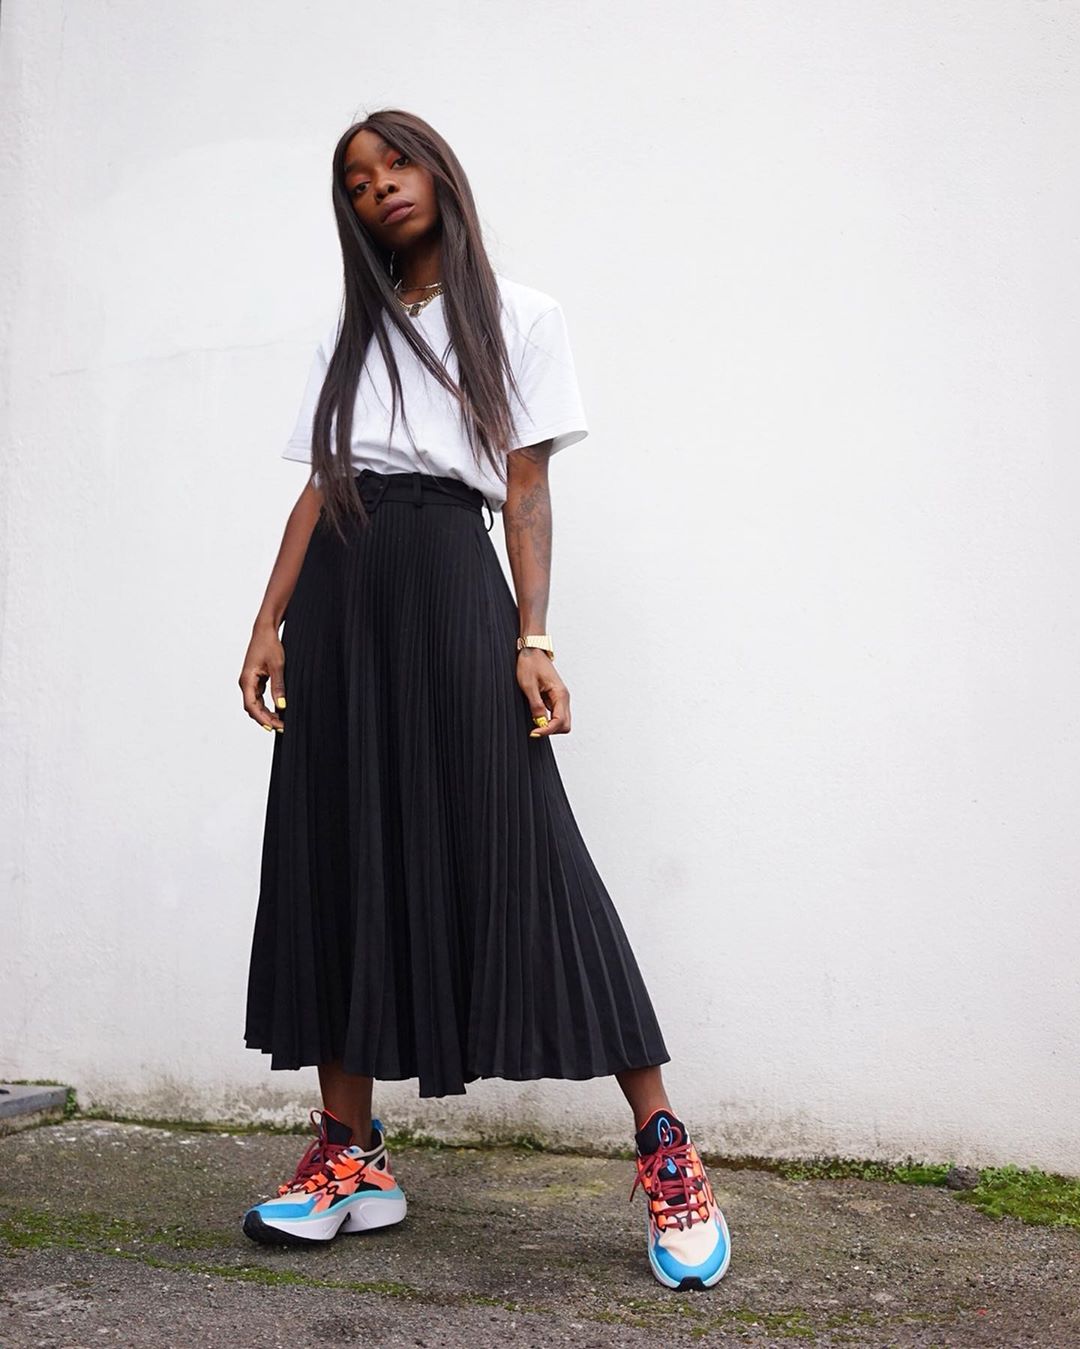 Le Fashion: This Street Style Look is the Ultimate Casual-Chic Combo